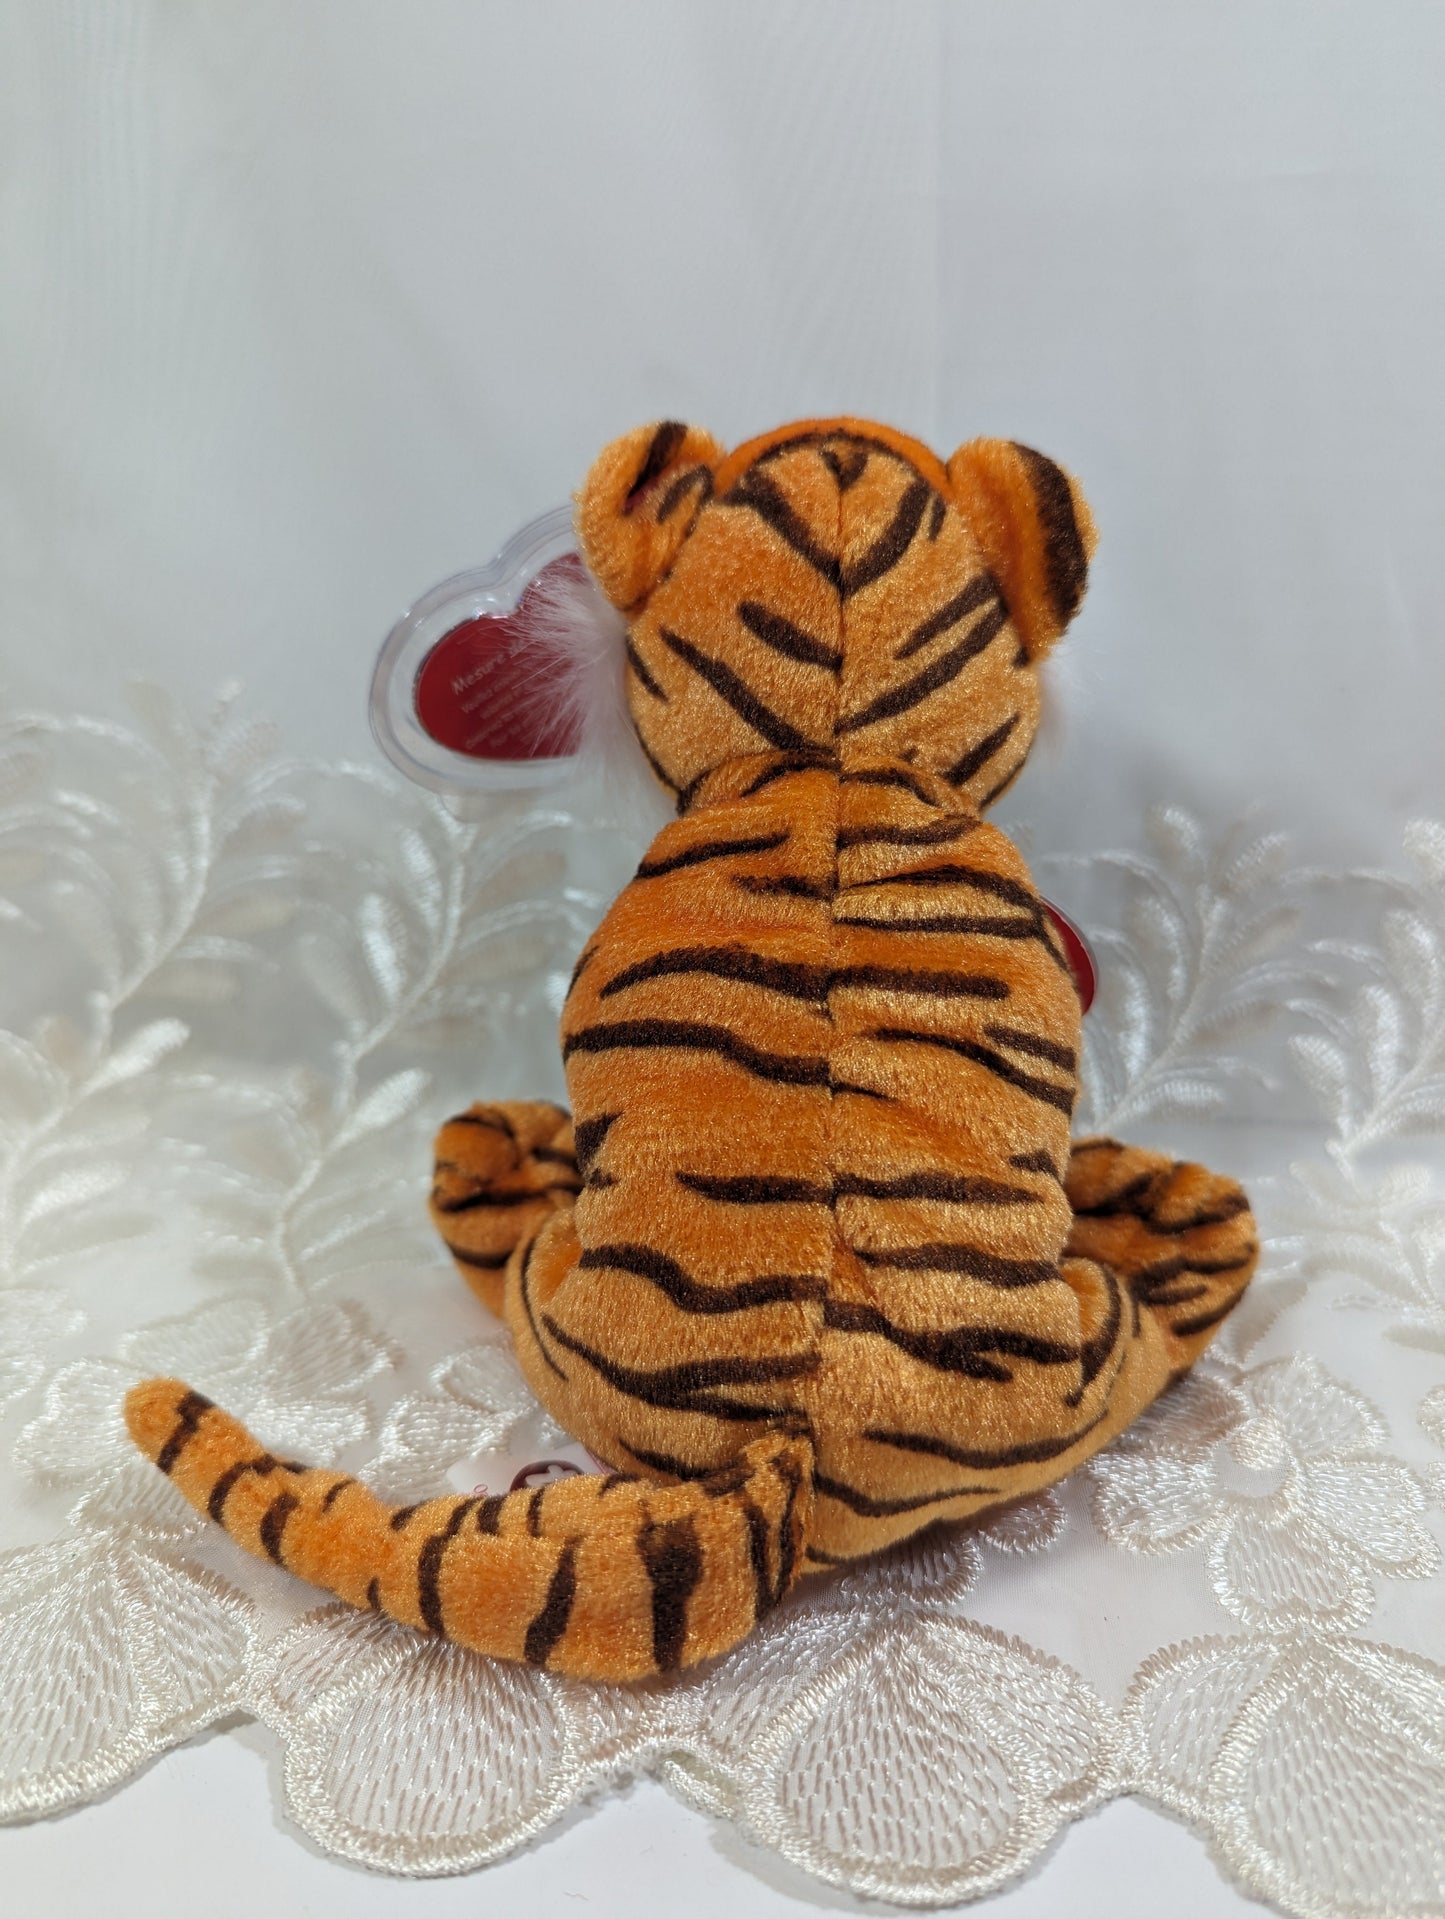 Ty Beanie Baby 2.0 - Oasis the Tiger (6in) - Vintage Beanies Canada